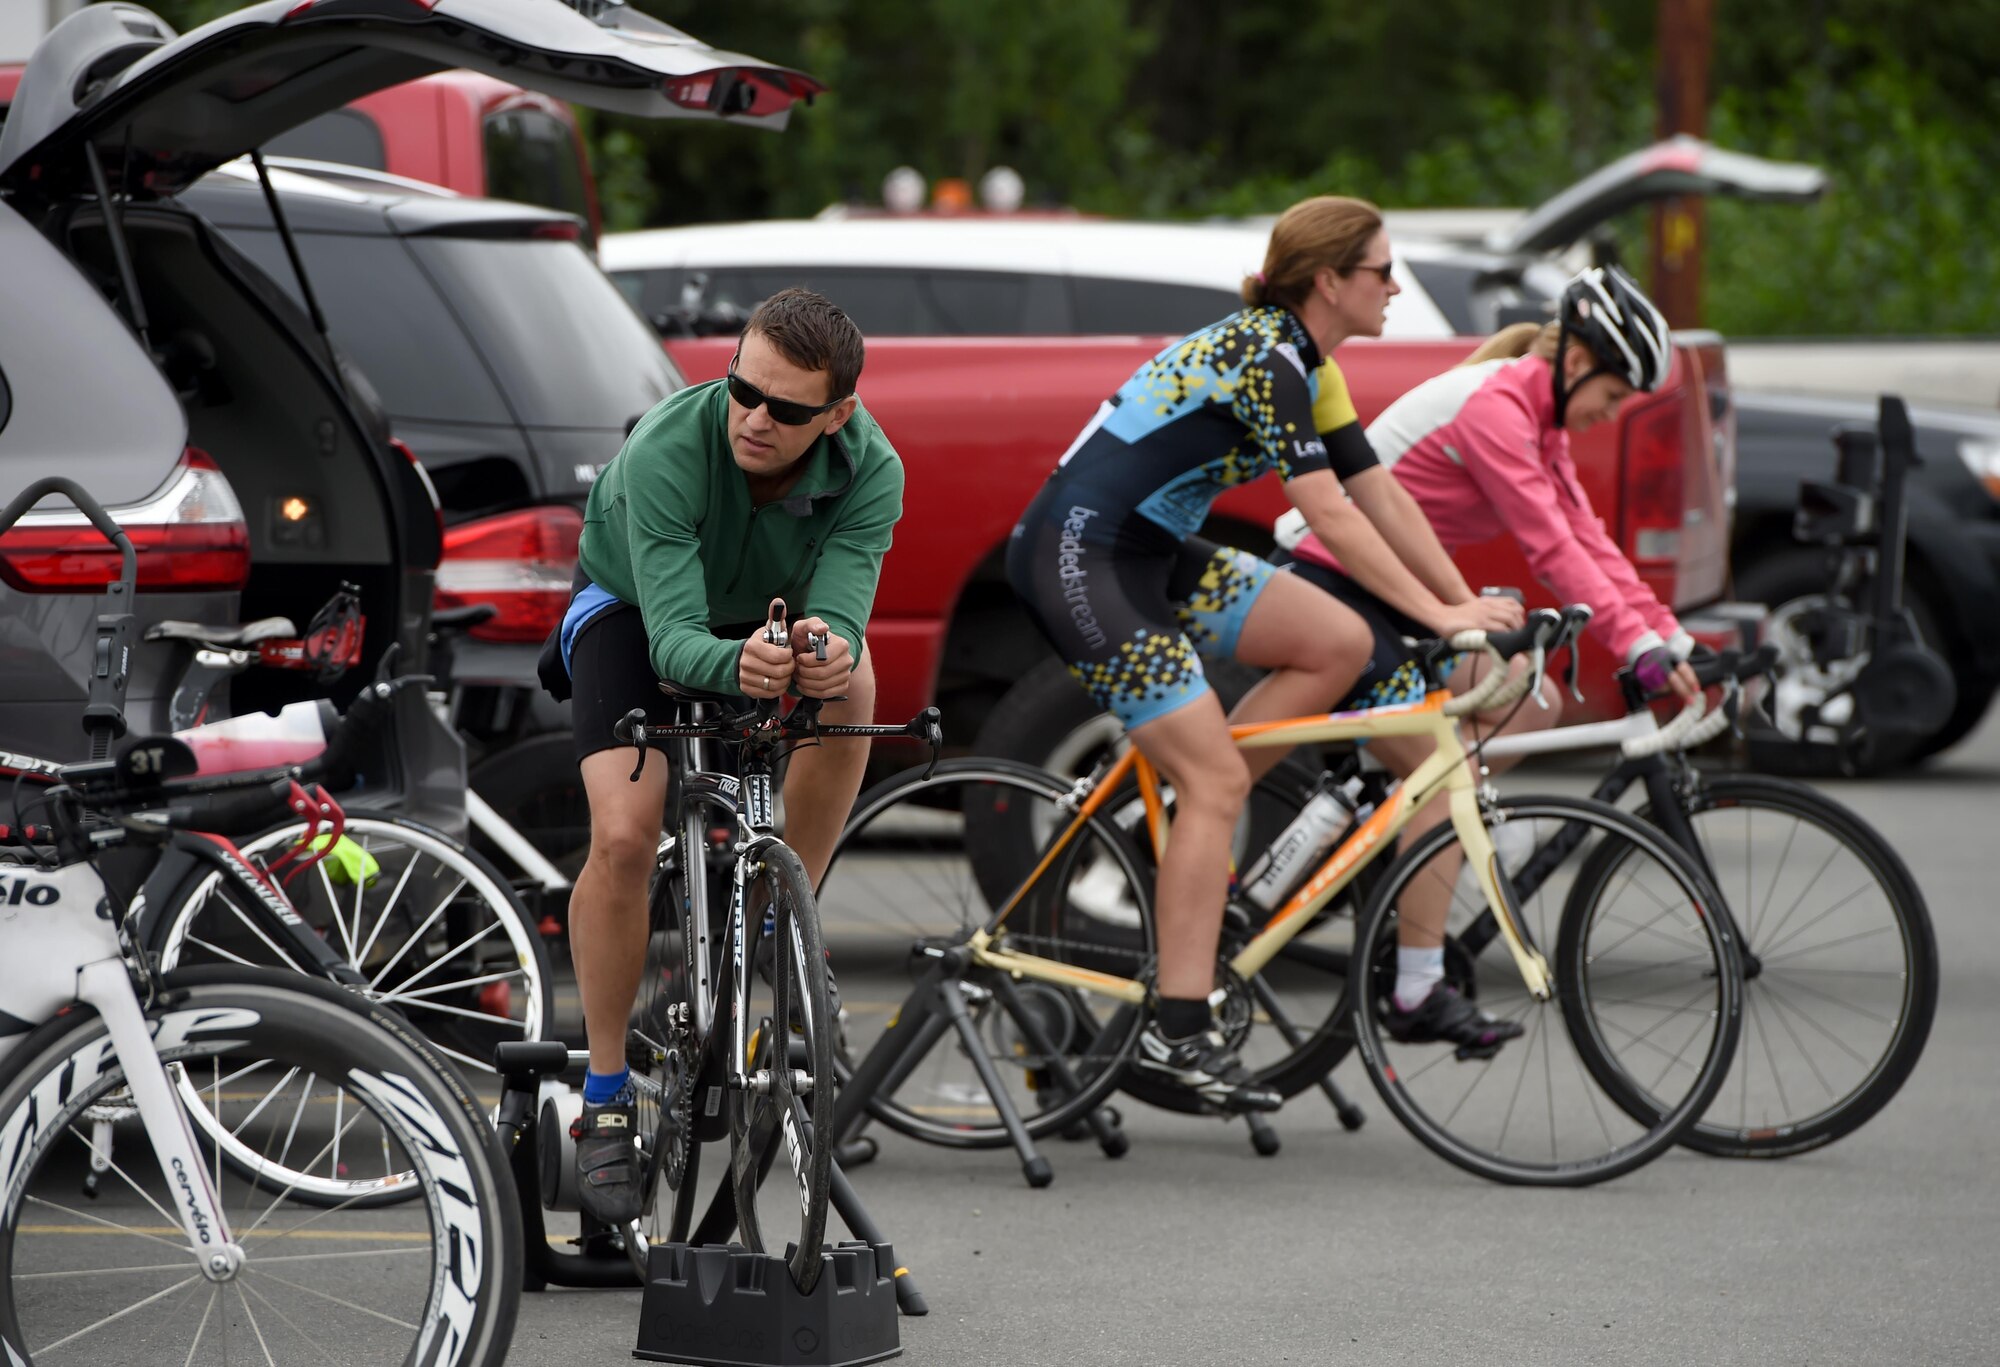 Arctic Bicycle Club athletes perform pre-race exercises in preparation for the 10-mile time-trial race at the Moose Run Golf Course at Joint Base Elmendorf-Richardson, Alaska, Aug. 3, 2017. For more than 15 years, the club has hosted road race events at JBER.